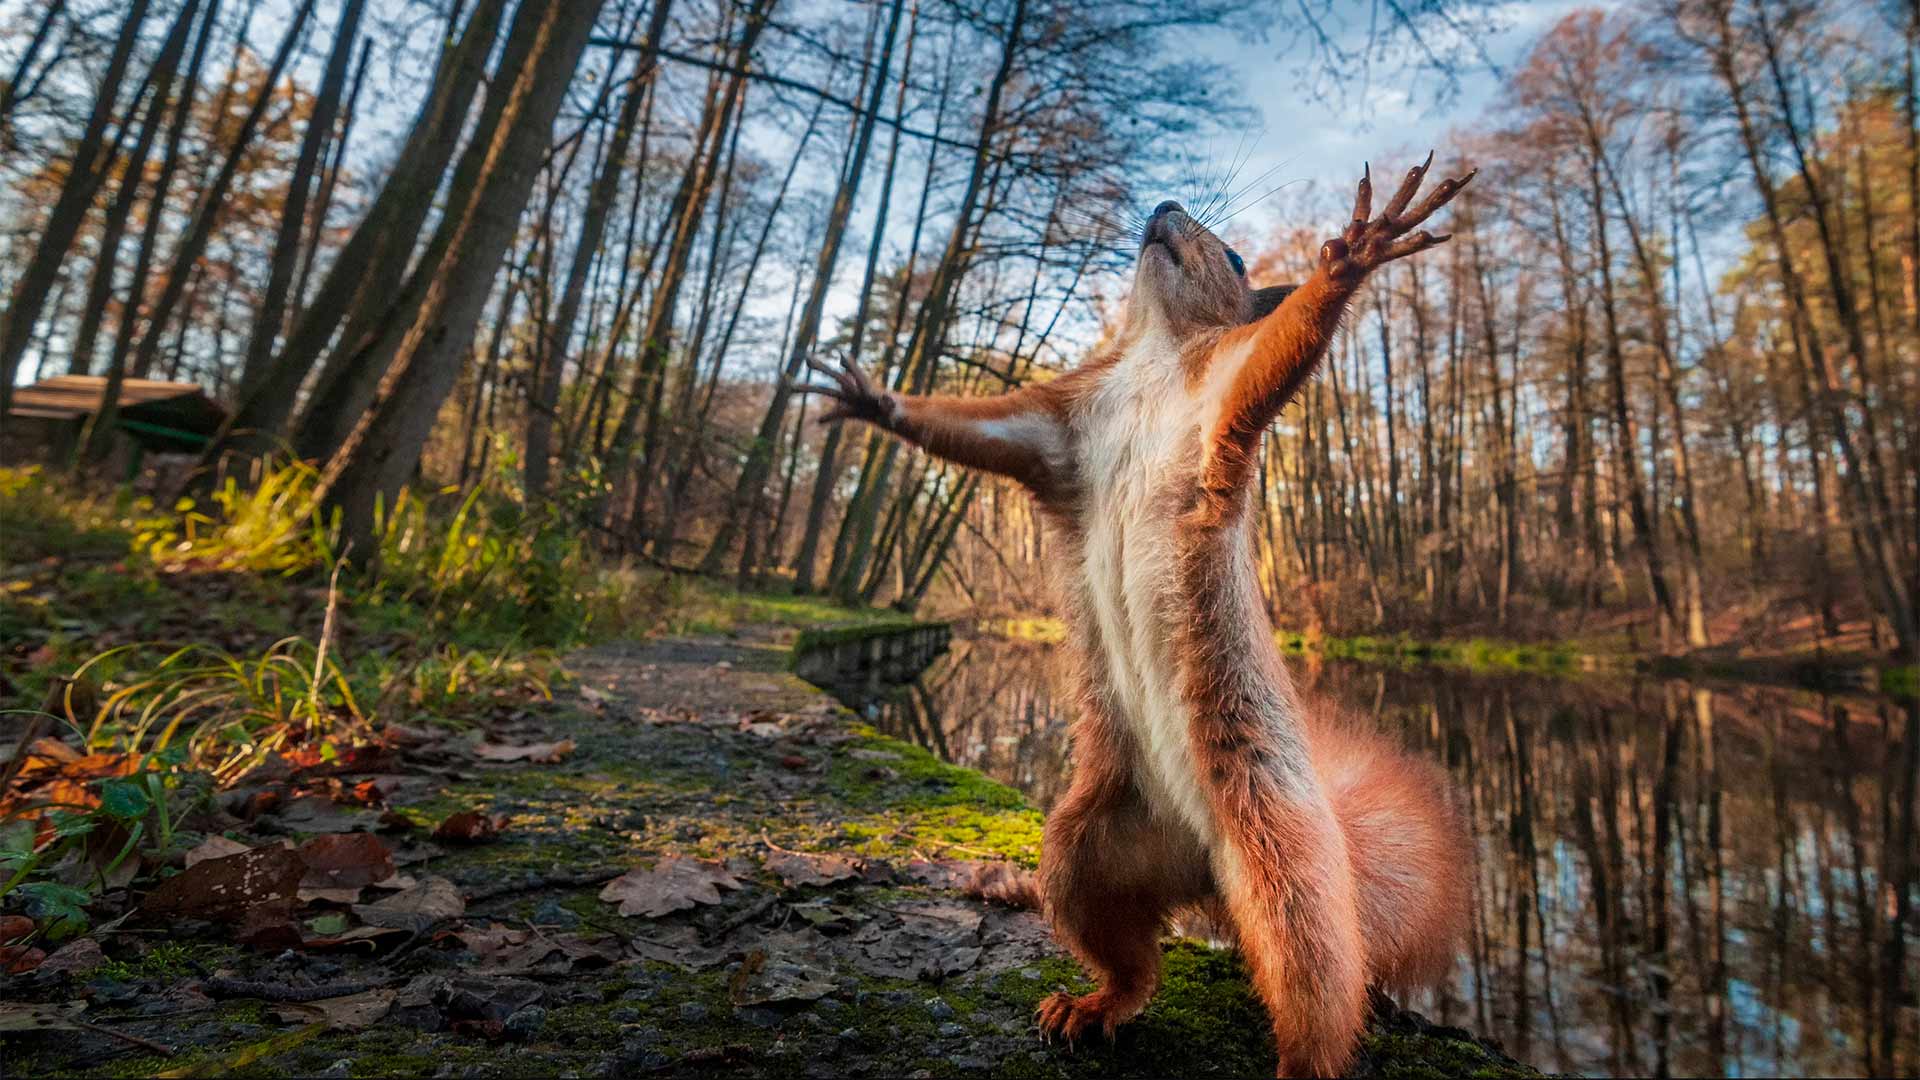 Red squirrell standing with its arms stretched out in forest